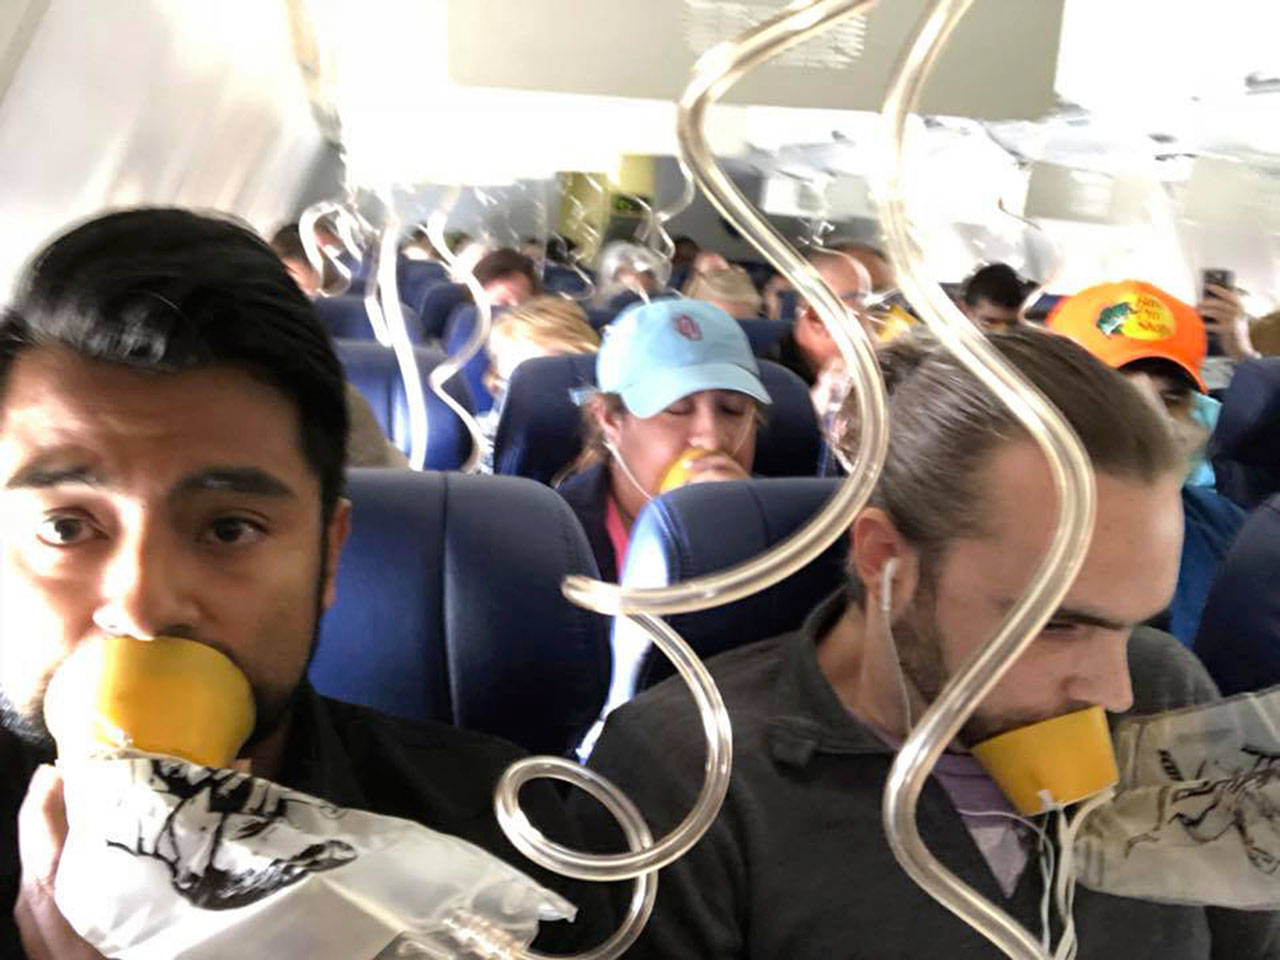 Marty Martinez (left) appears with other passengers after a jet engine blew out on a Southwest Airlines Boeing 737, resulting in the death of a woman who was nearly sucked from a window during the flight. (Marty Martinez via AP)